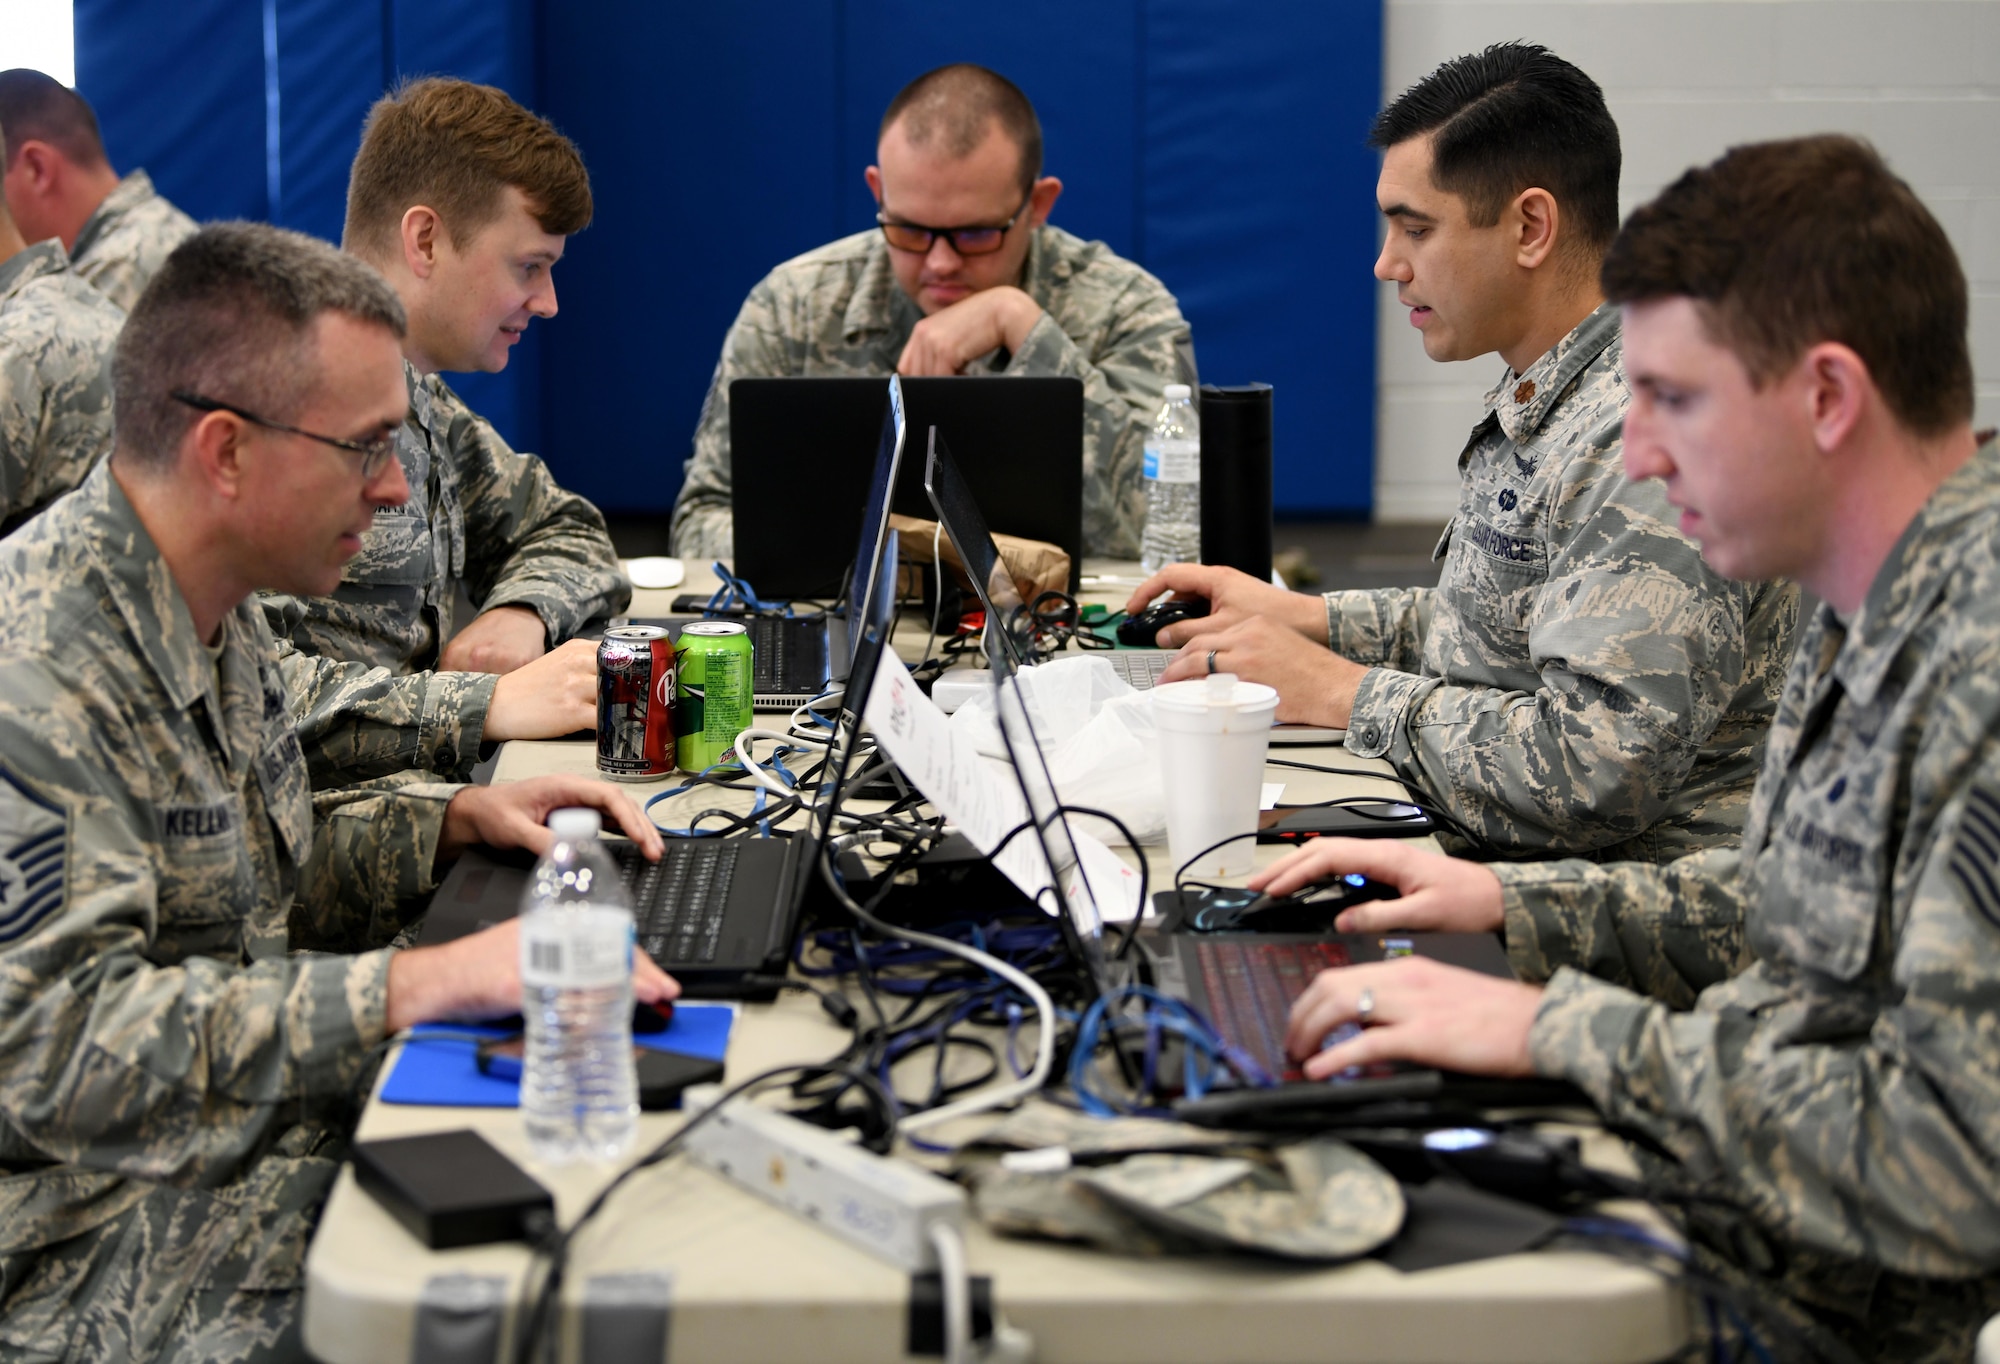 Teams compete in offensive and defensive cyber operations during the 2019 24th Air Force Cyber Competition in San Antonio, Texas, June 3-7, 2019. Eighty-three Airmen from 20 units across the 24th AF competed in the cyber capture-the-flag in hopes of having their names etched on the coveted cyber cup. (U.S. Air Force photo by Tech. Sgt. R.J. Biermann)